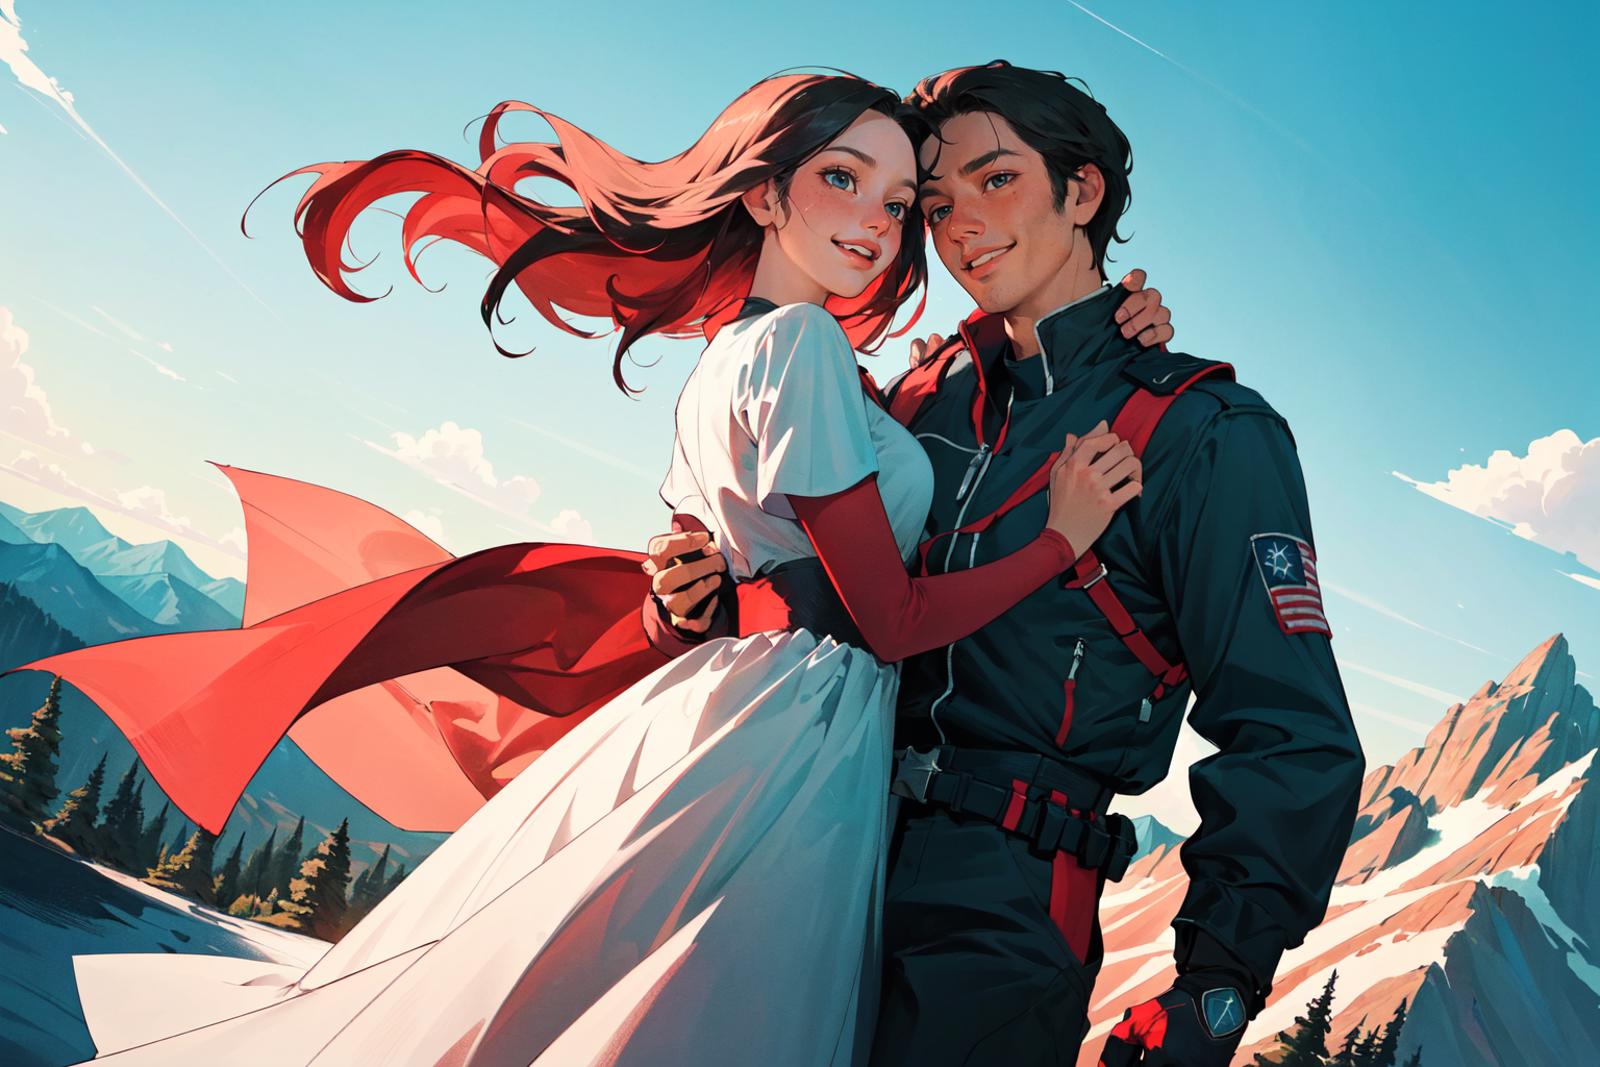 A cartoon image of a man and woman, both wearing red, as they embrace and look at each other.